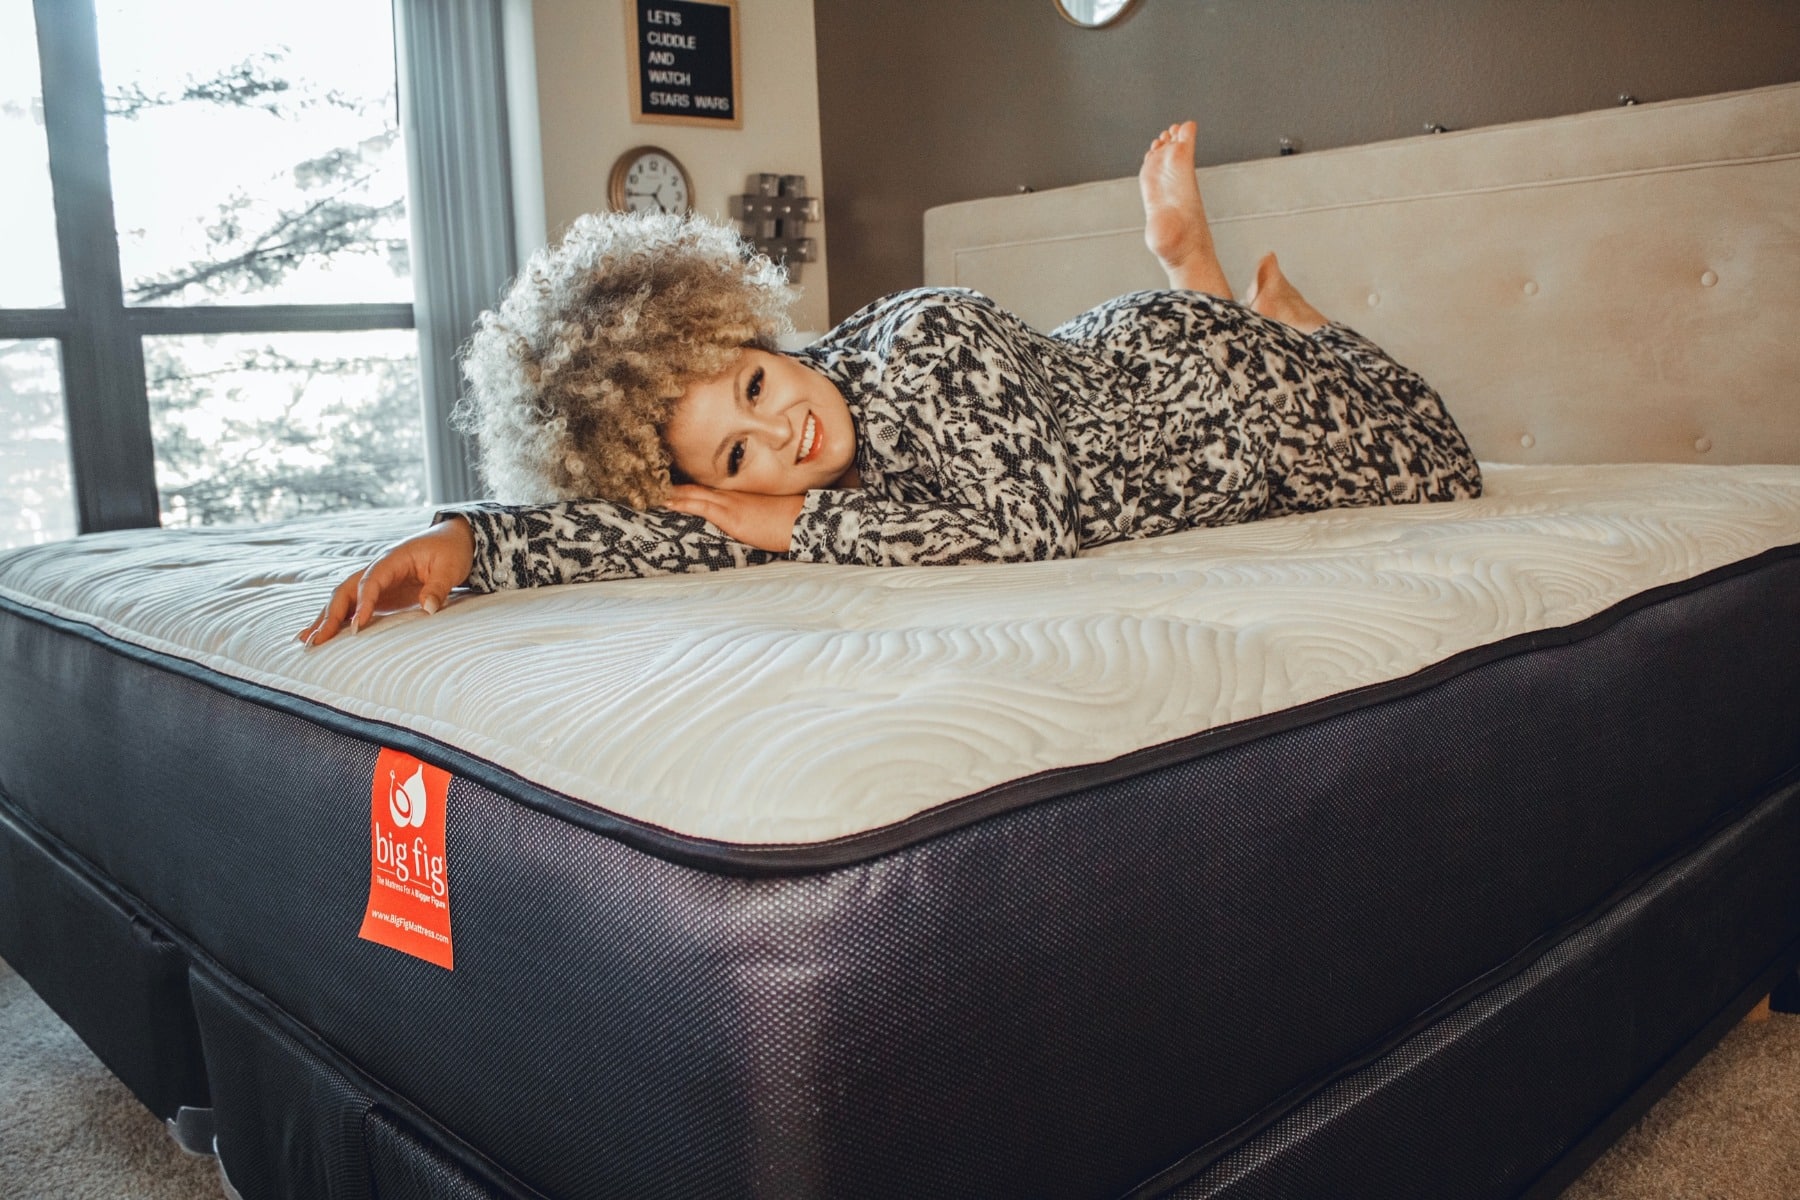 Best Mattress For Heavy People Reviews, Bigfig Bed Frame